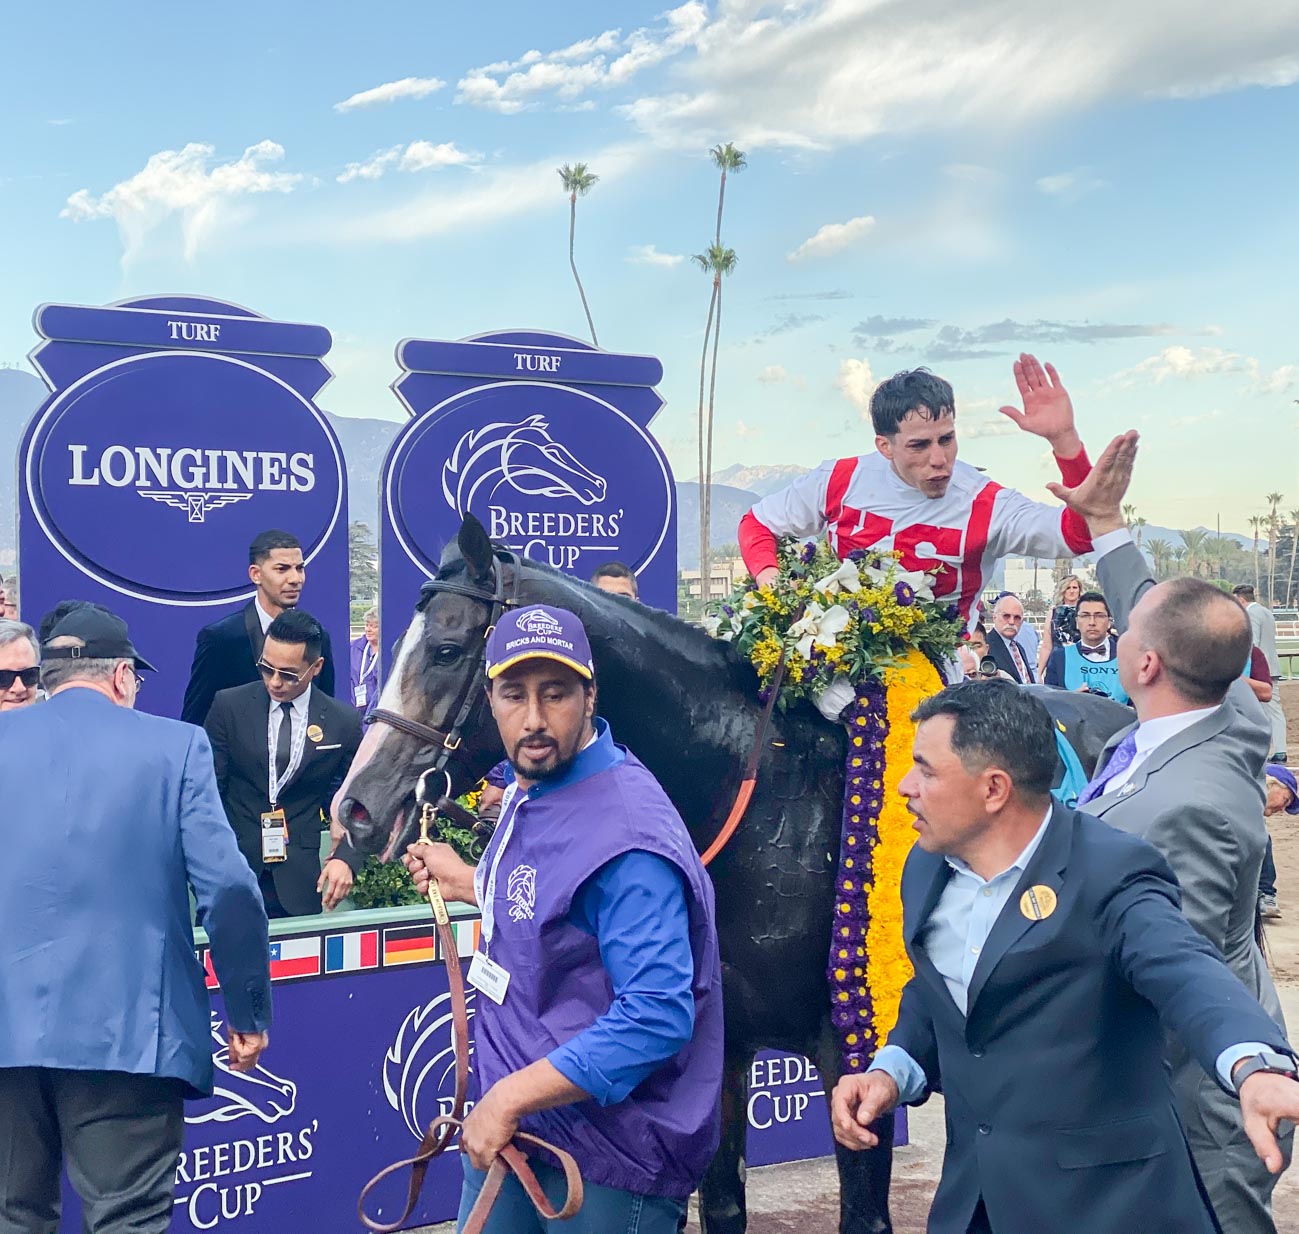 Longines-Master-Collection-Moonphase-watch-breeders-cup-2019-23.jpg